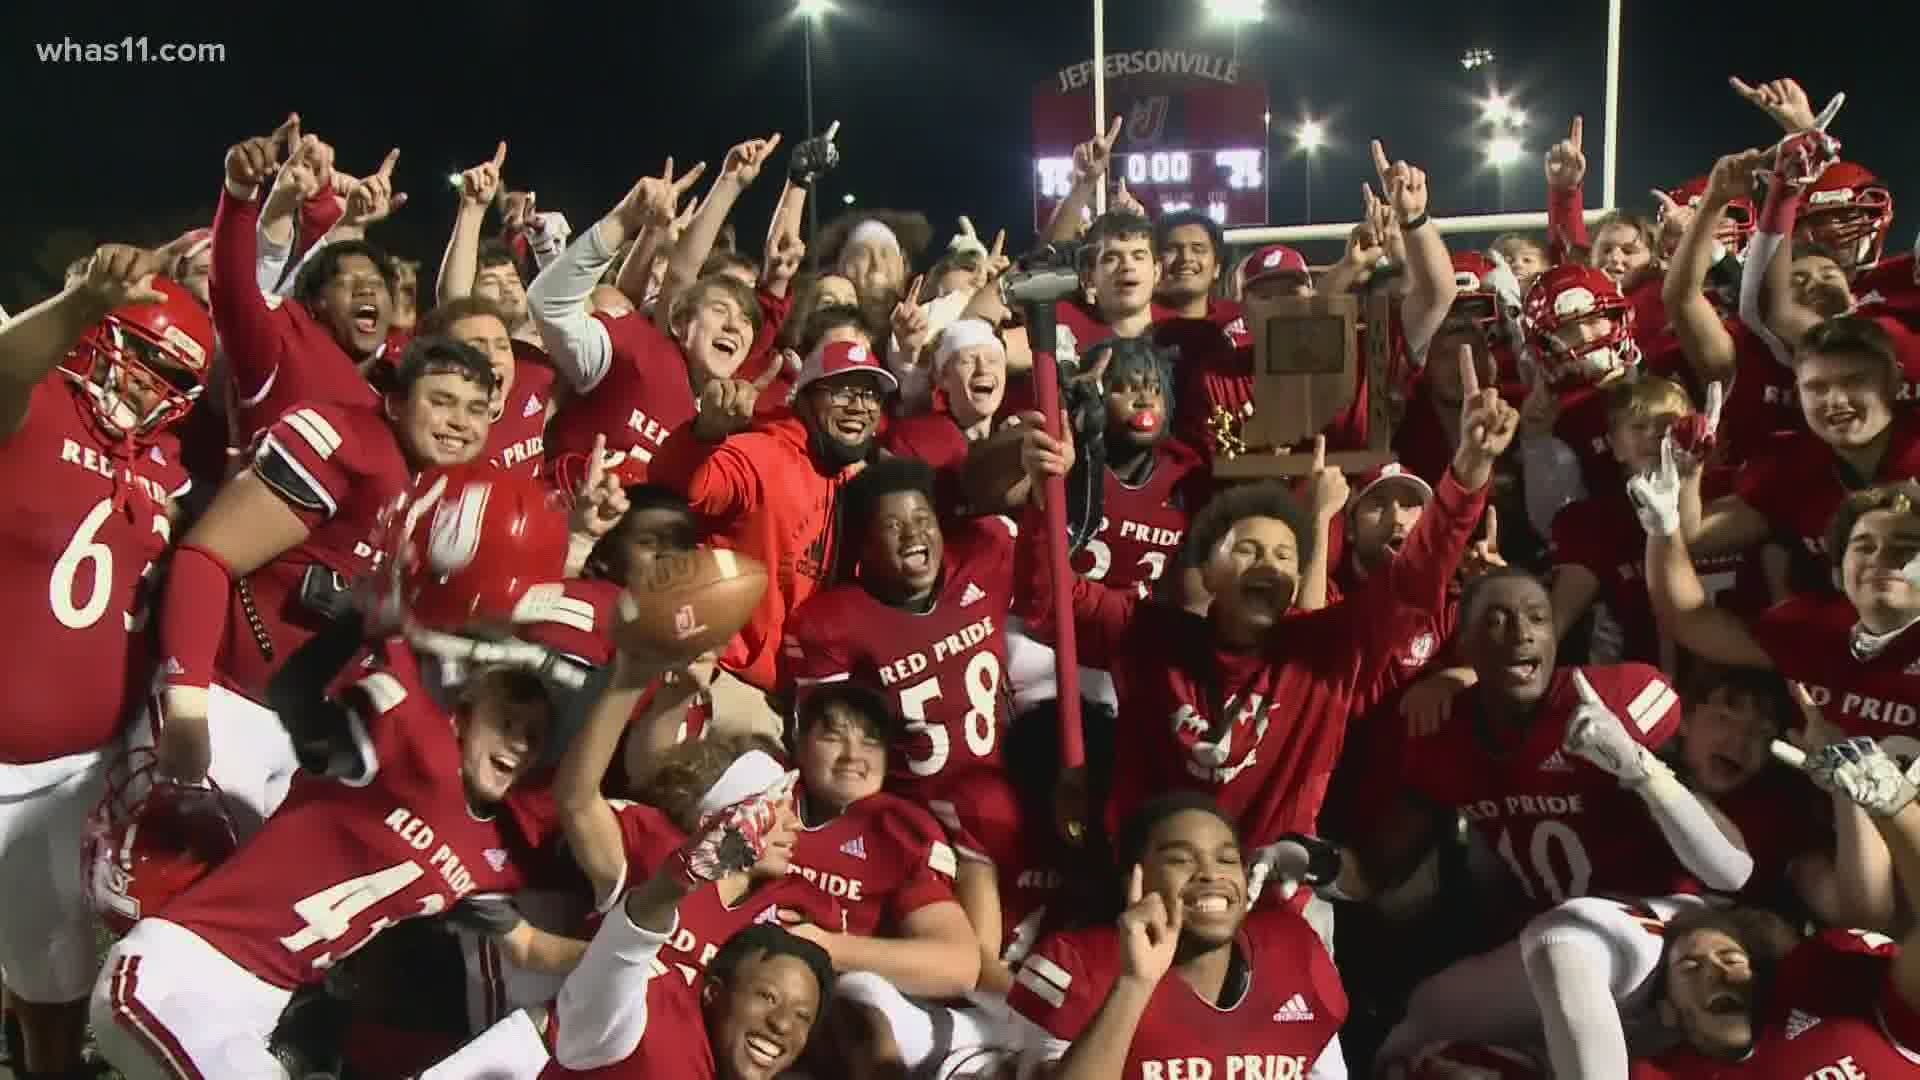 Jeff won its first sectionals title since 2007, beating New Albany 35-25.